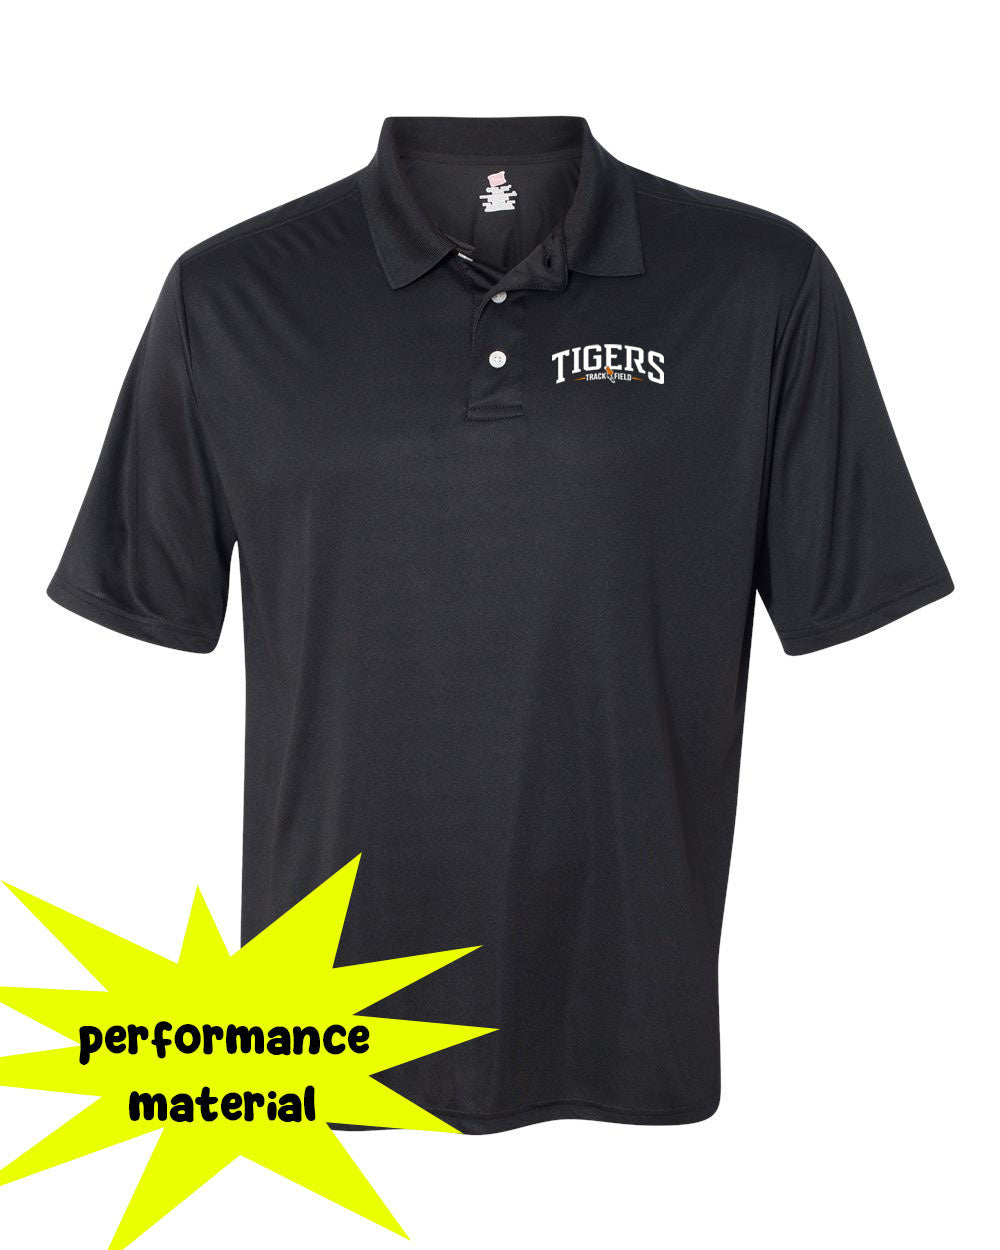 Lafayette Track Performance Material Polo T-Shirt Design 1